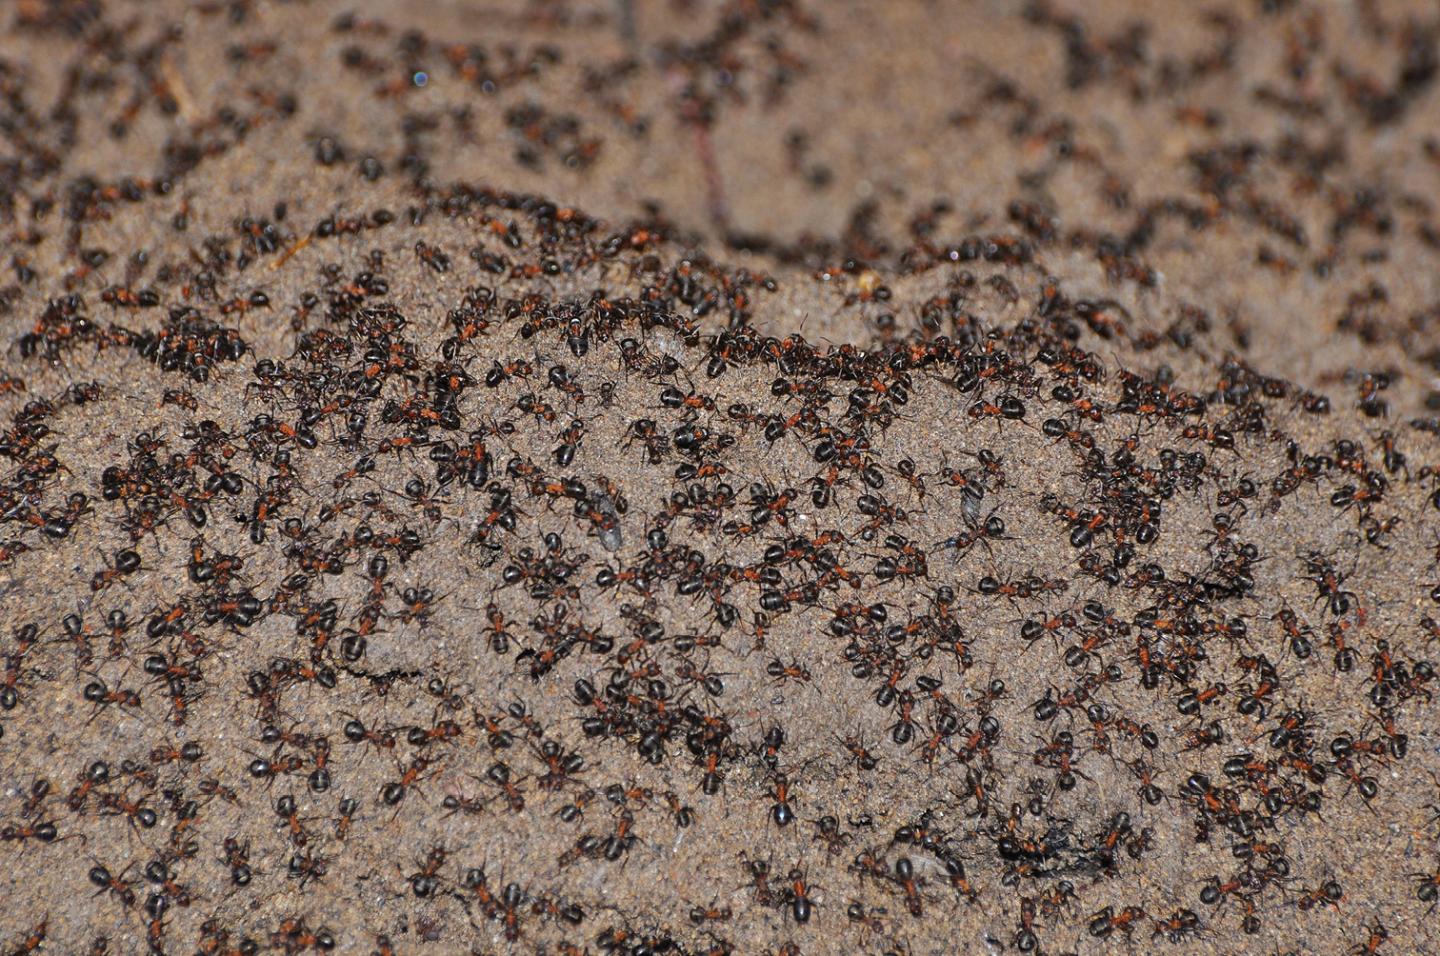 The Trapped Ants